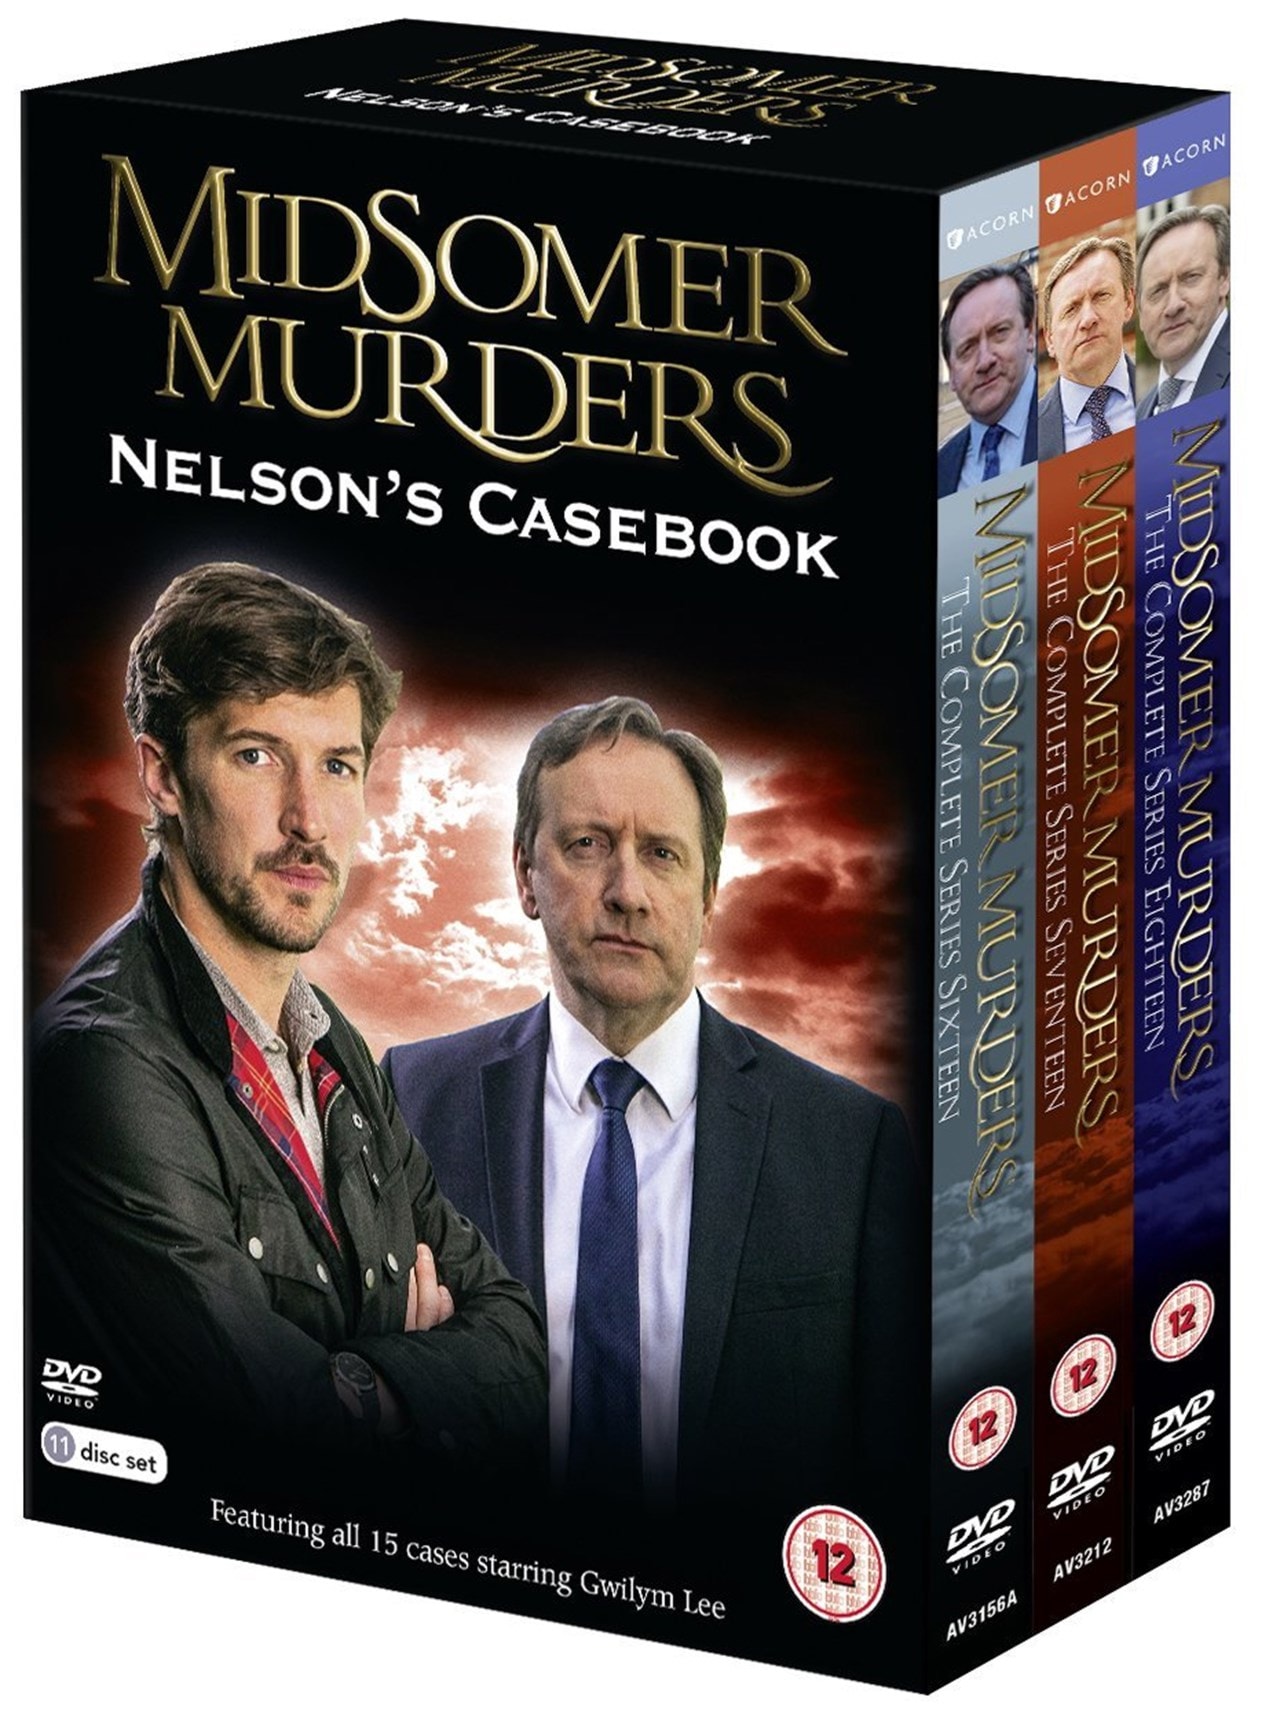 Download Midsomer Murders Nelson S Casebook Dvd Box Set Free Shipping Over 20 Hmv Store Yellowimages Mockups